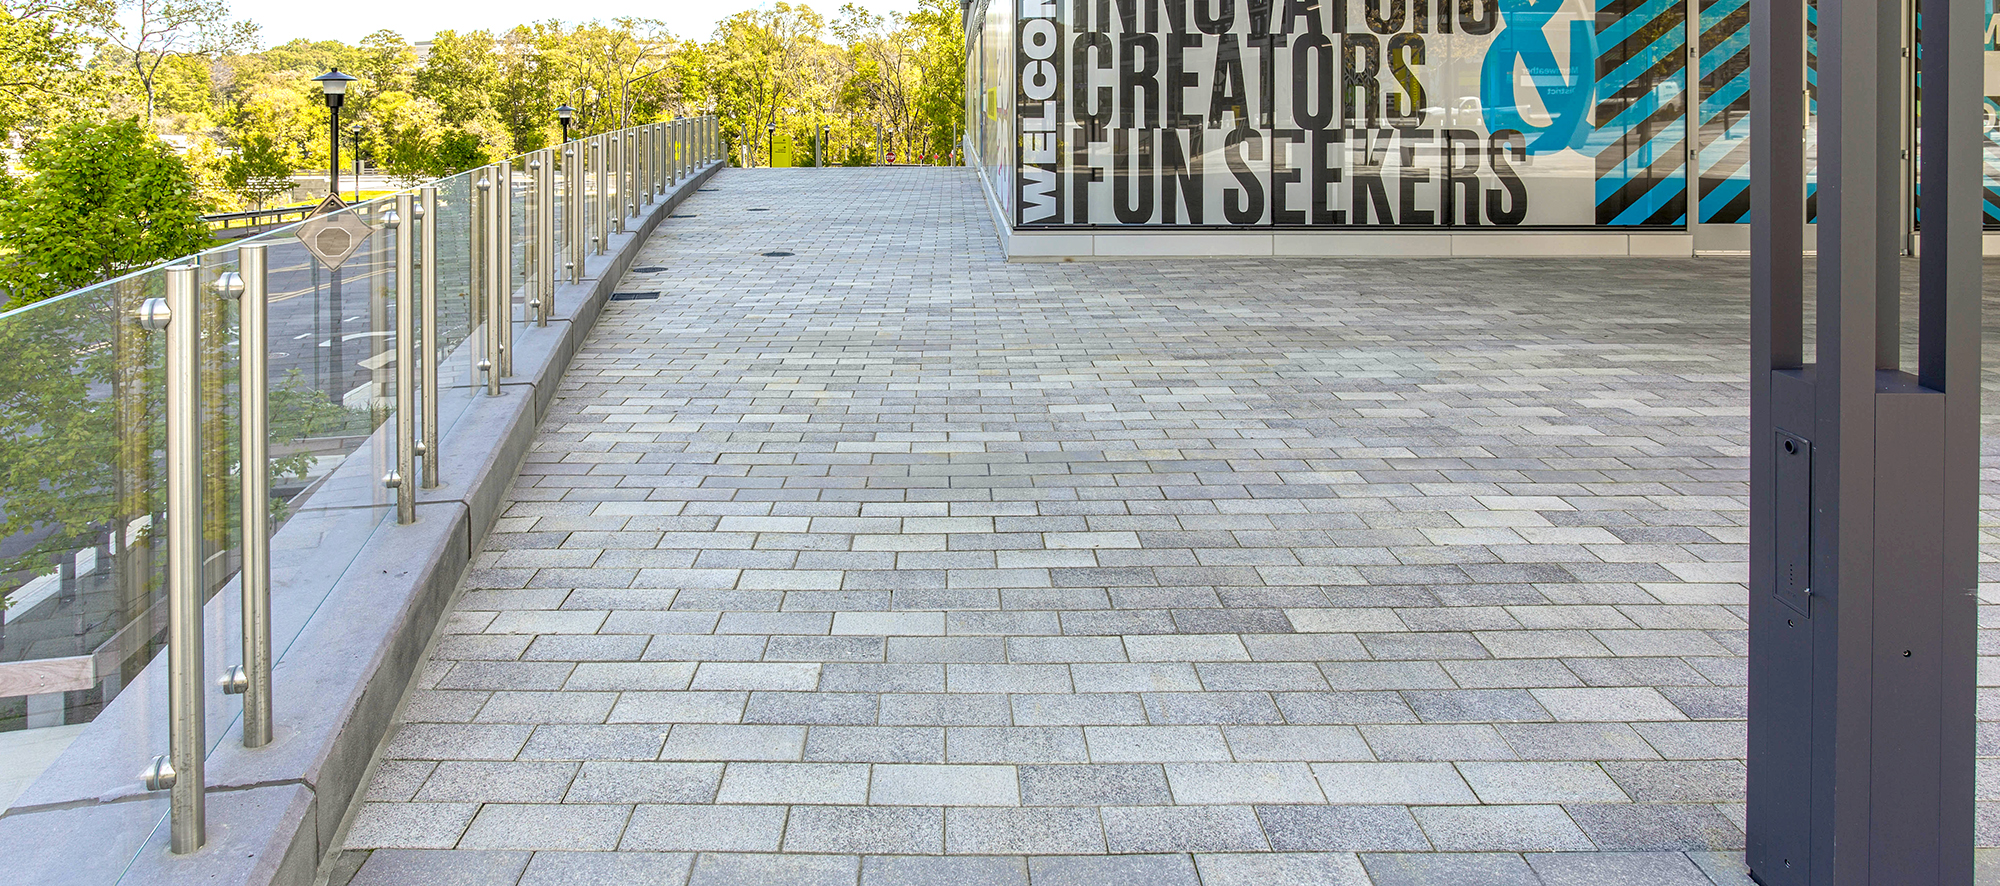 The blended tones of Promenade Plank Pavers allow for the deep colors of the building's inviting advertisement to stand out.